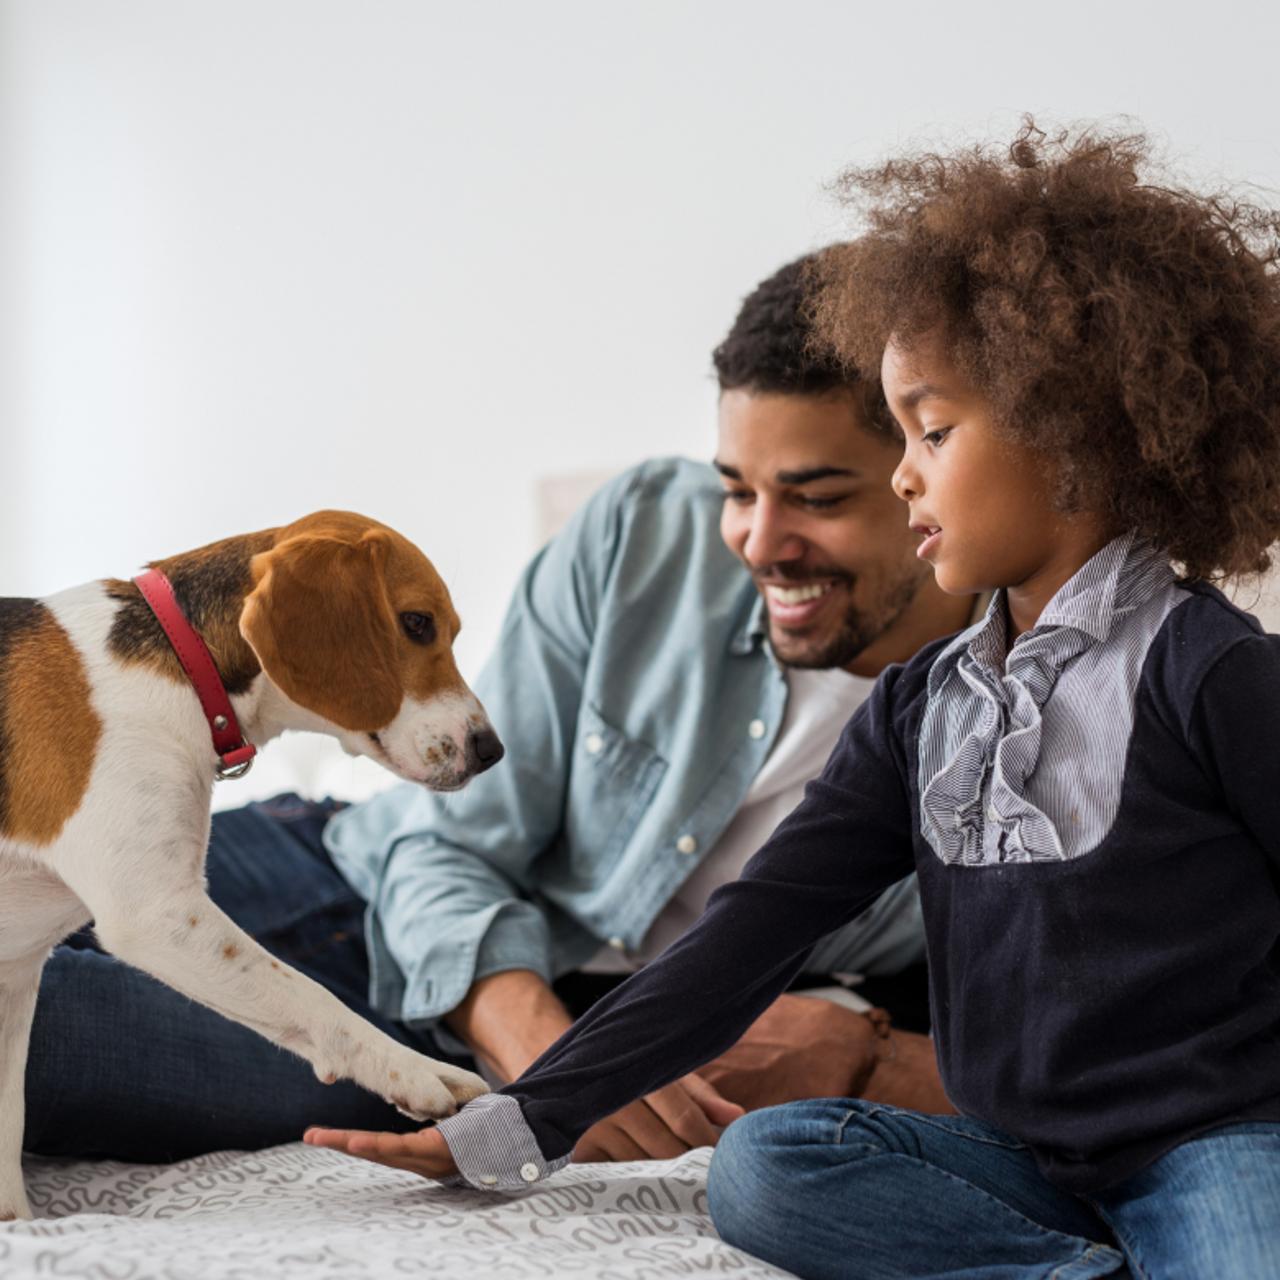 Happy father and young child playing with a beagle dog on a bed in a bright home environment.